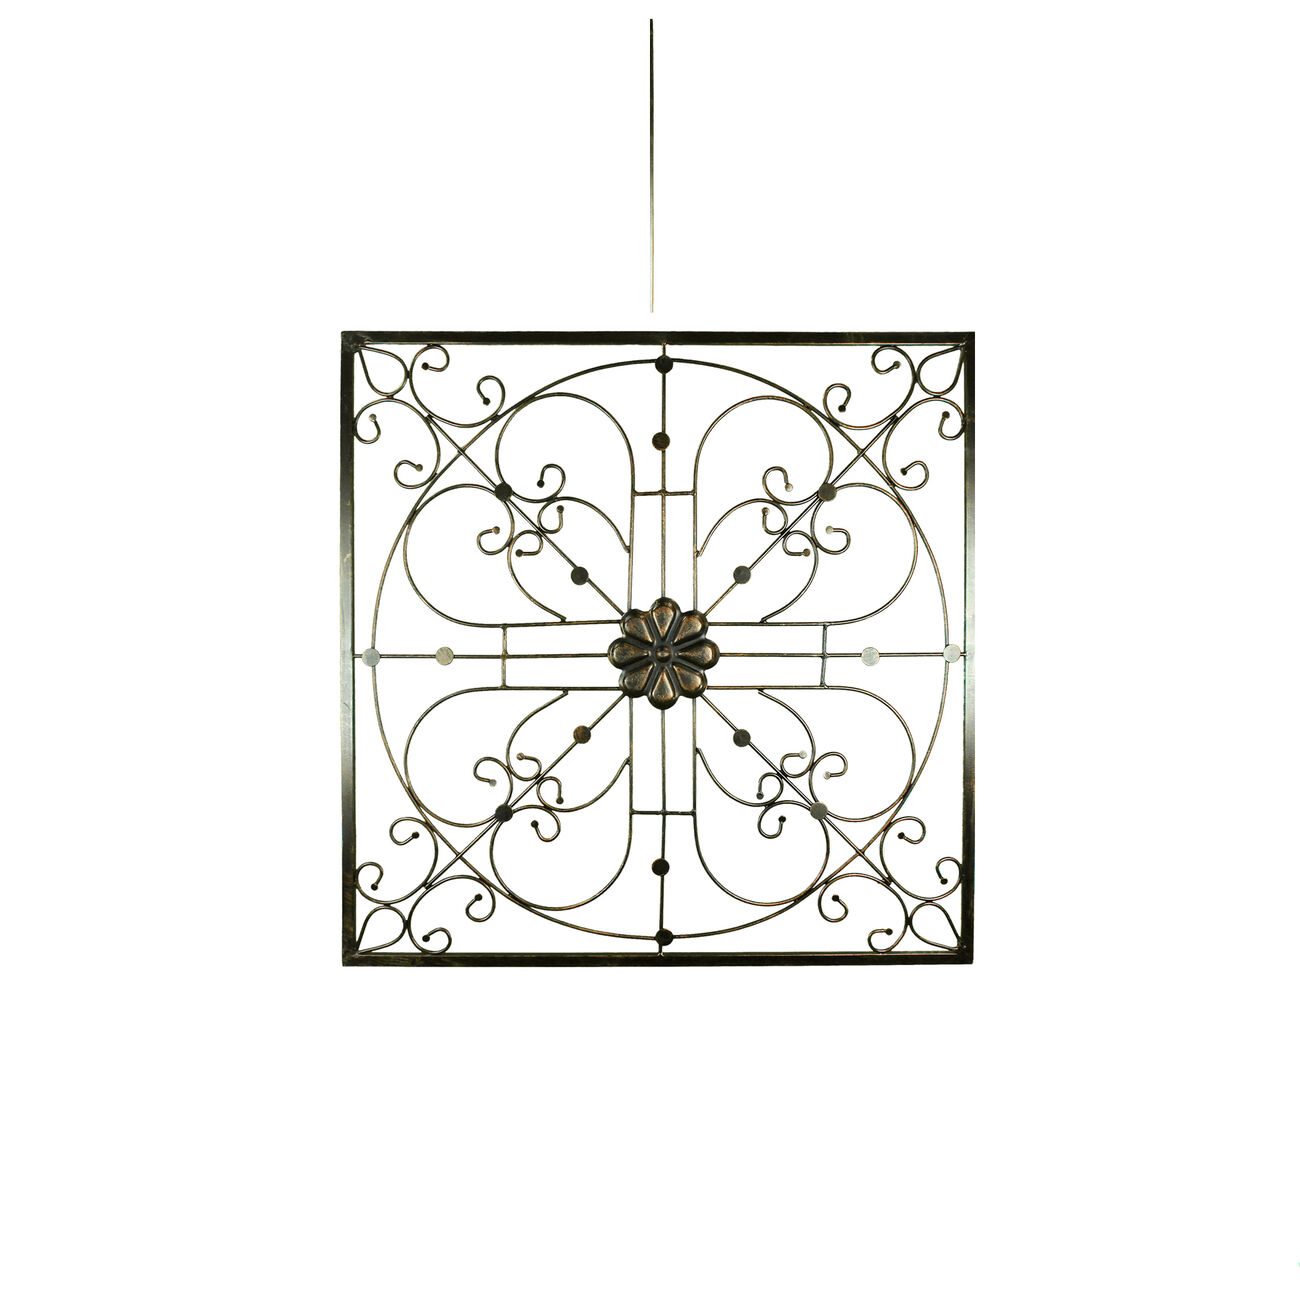 Iron WallDecor with Flower Accent and Squared Framed Design, Assortment of Two, Bronze